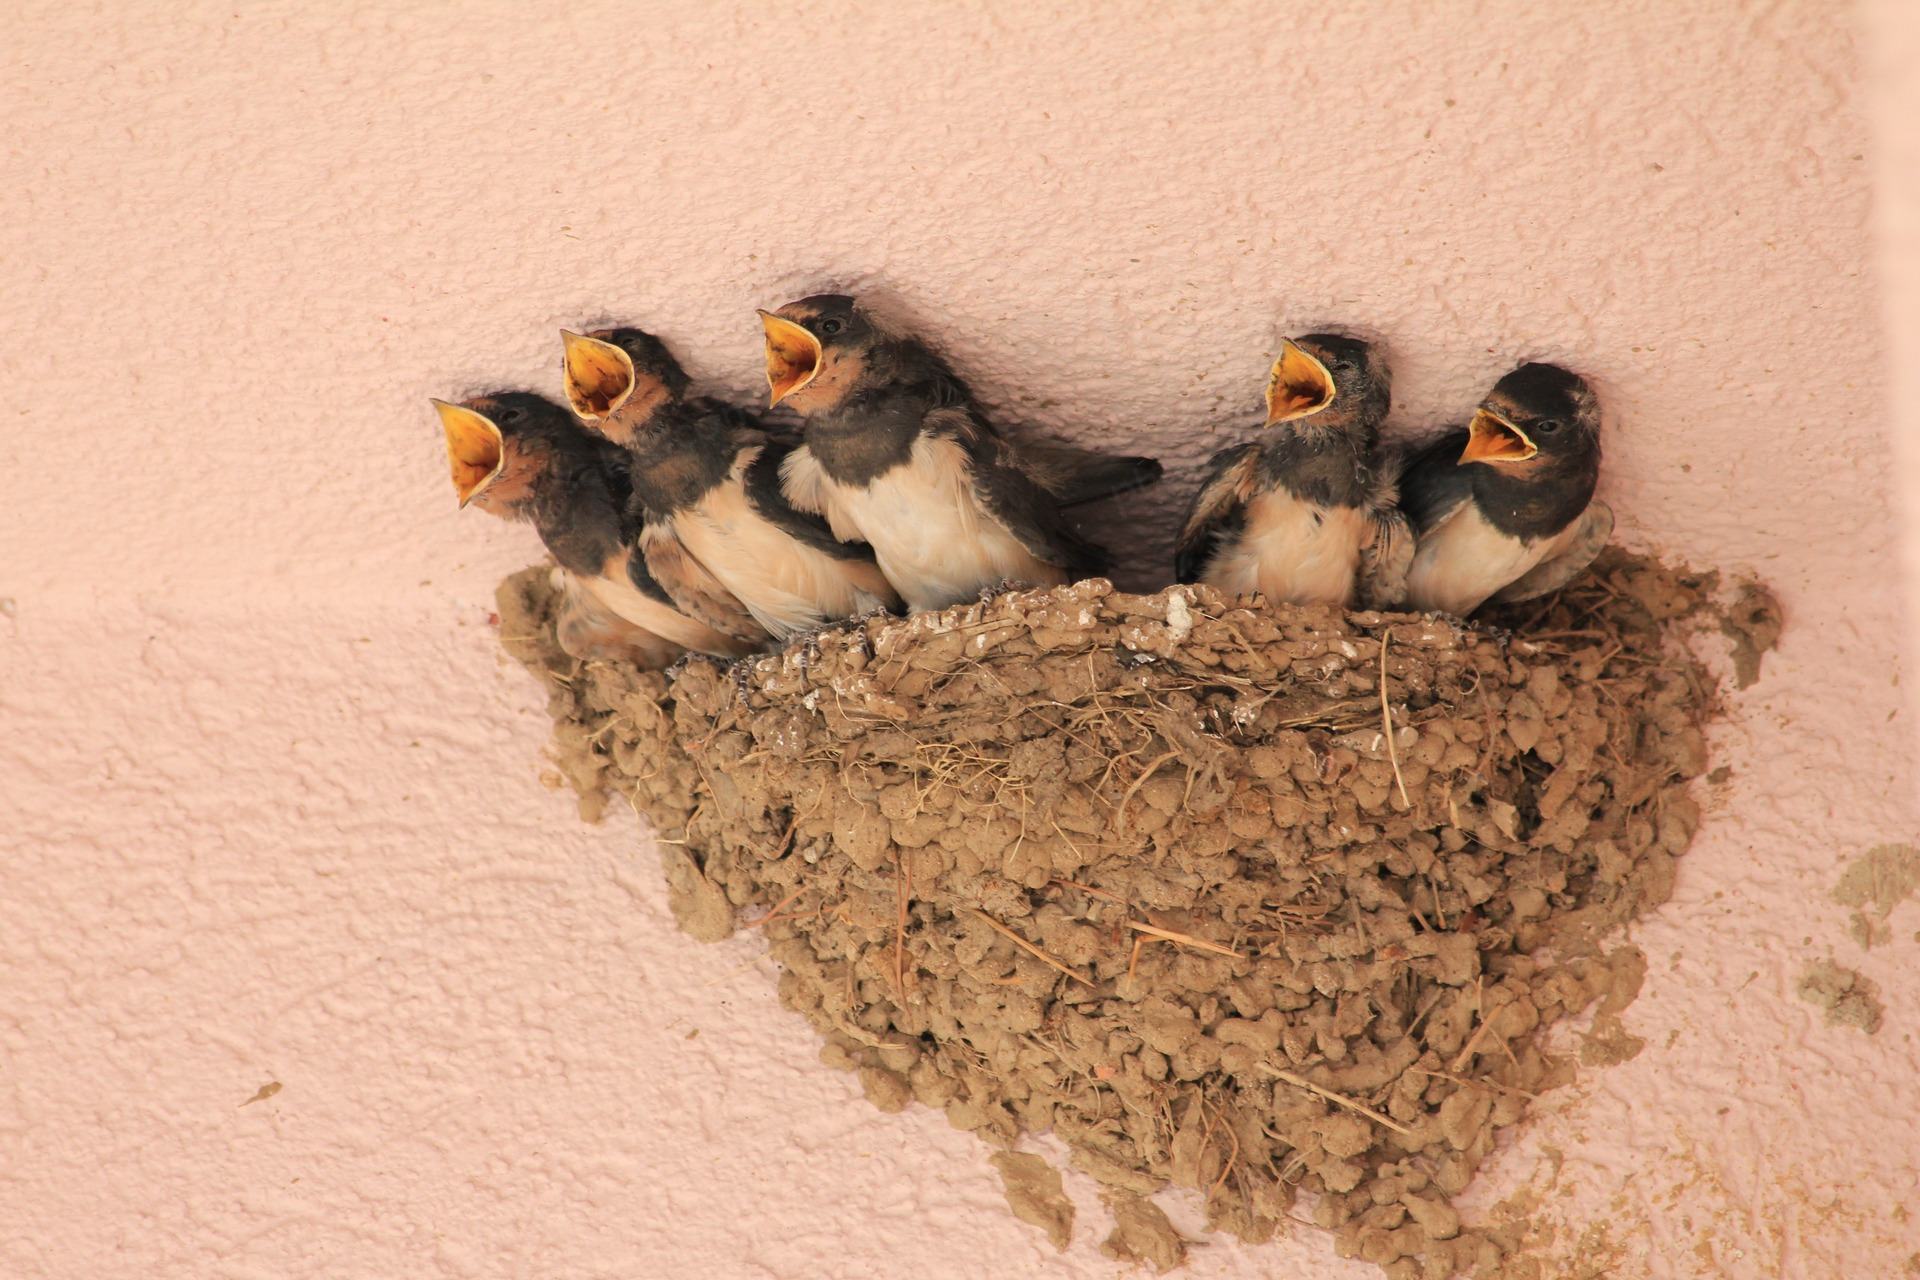 Baby swallows in a nest